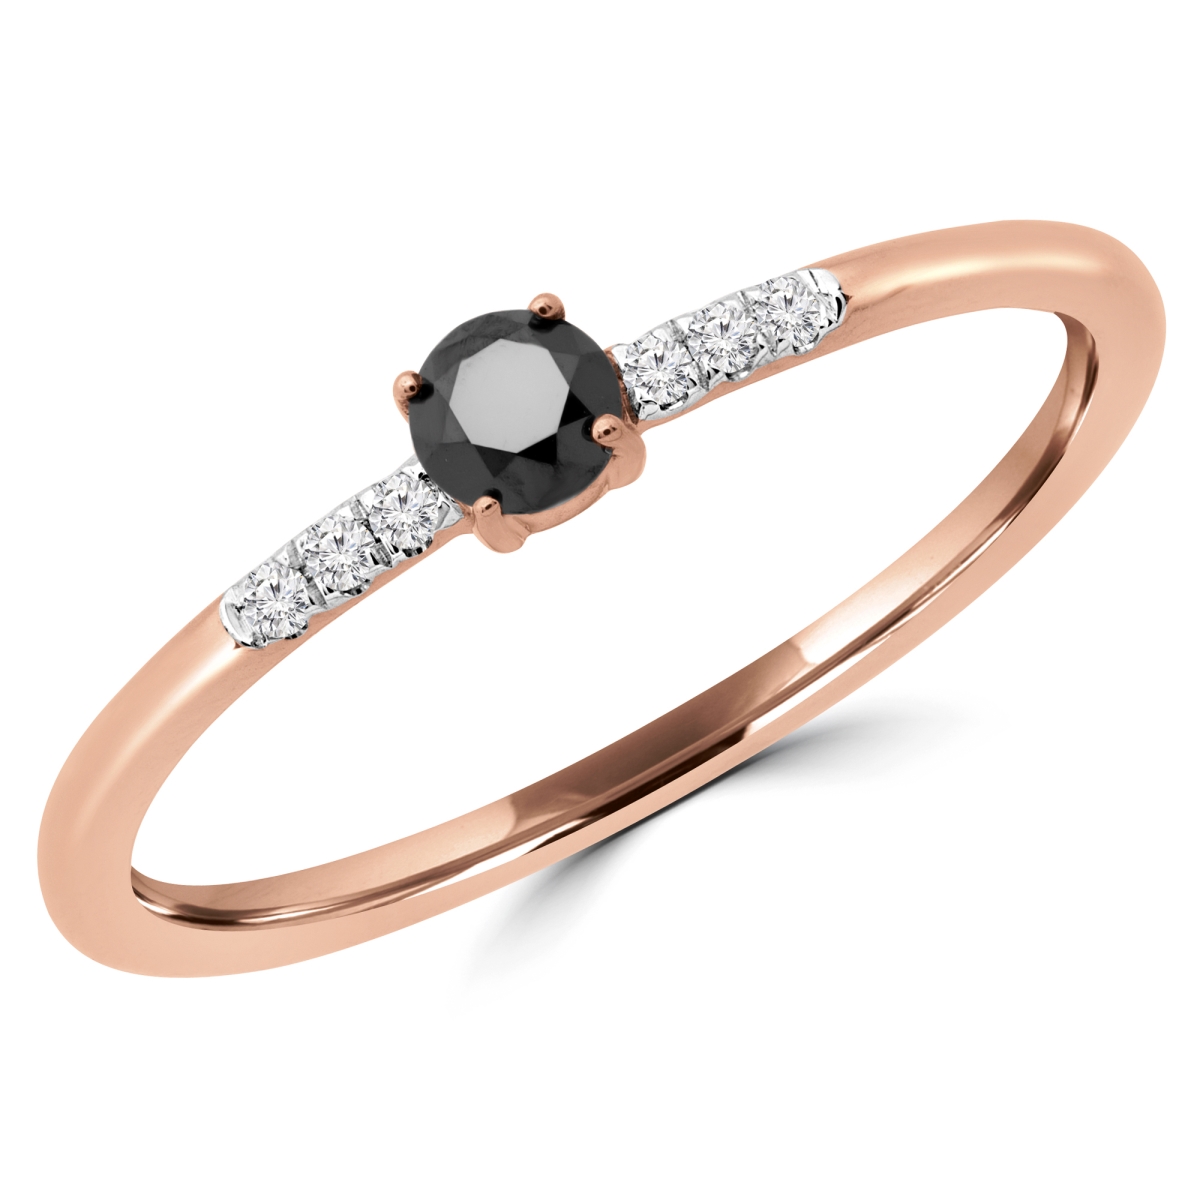 Picture of Majesty Diamonds MDR190079-P 0.16 CTW Round Black Diamond Bezel Set Cocktail Ring in 14K Rose Gold